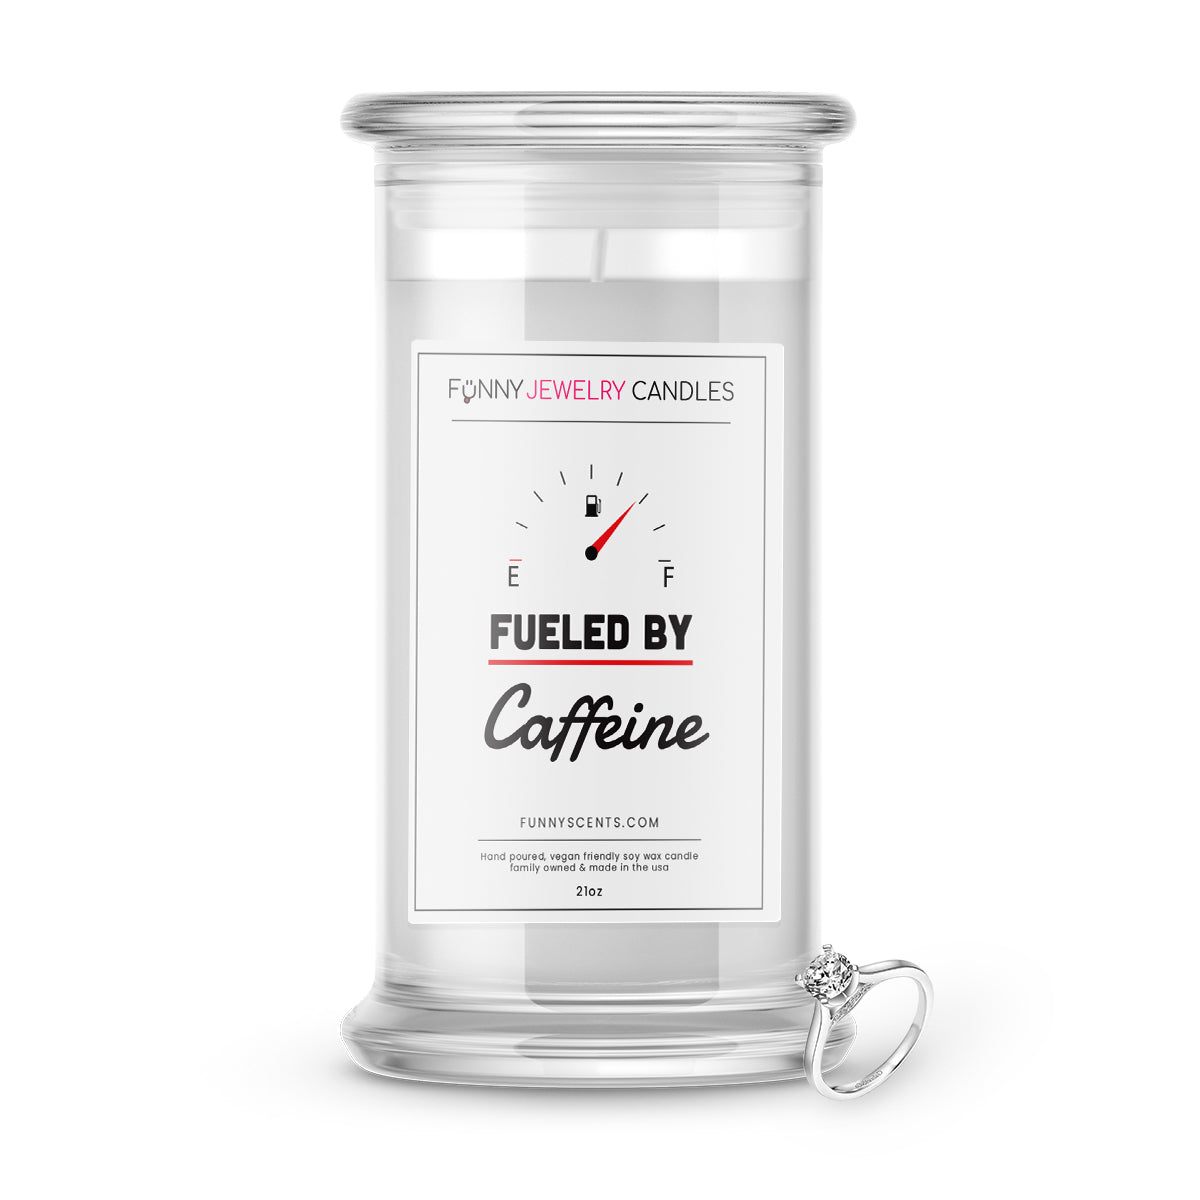 Fueled By Caffeine Jewelry Funny Candles